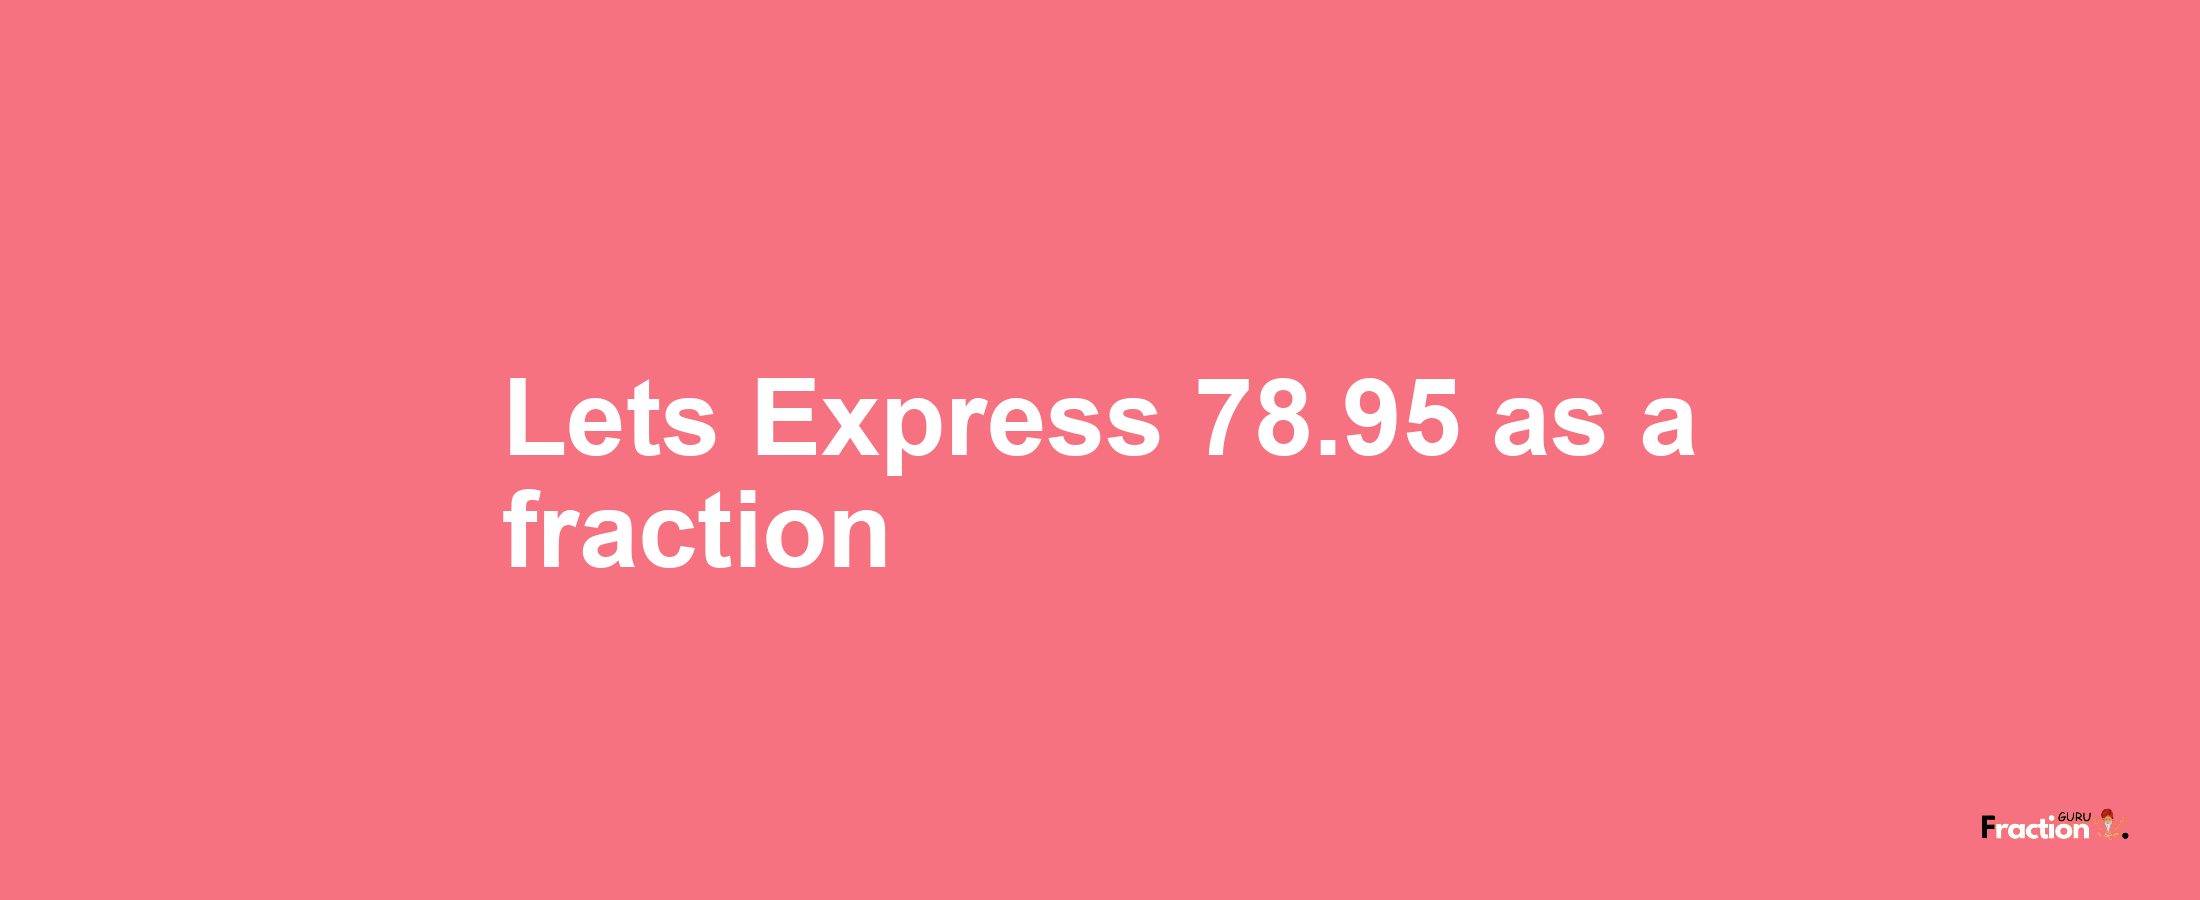 Lets Express 78.95 as afraction